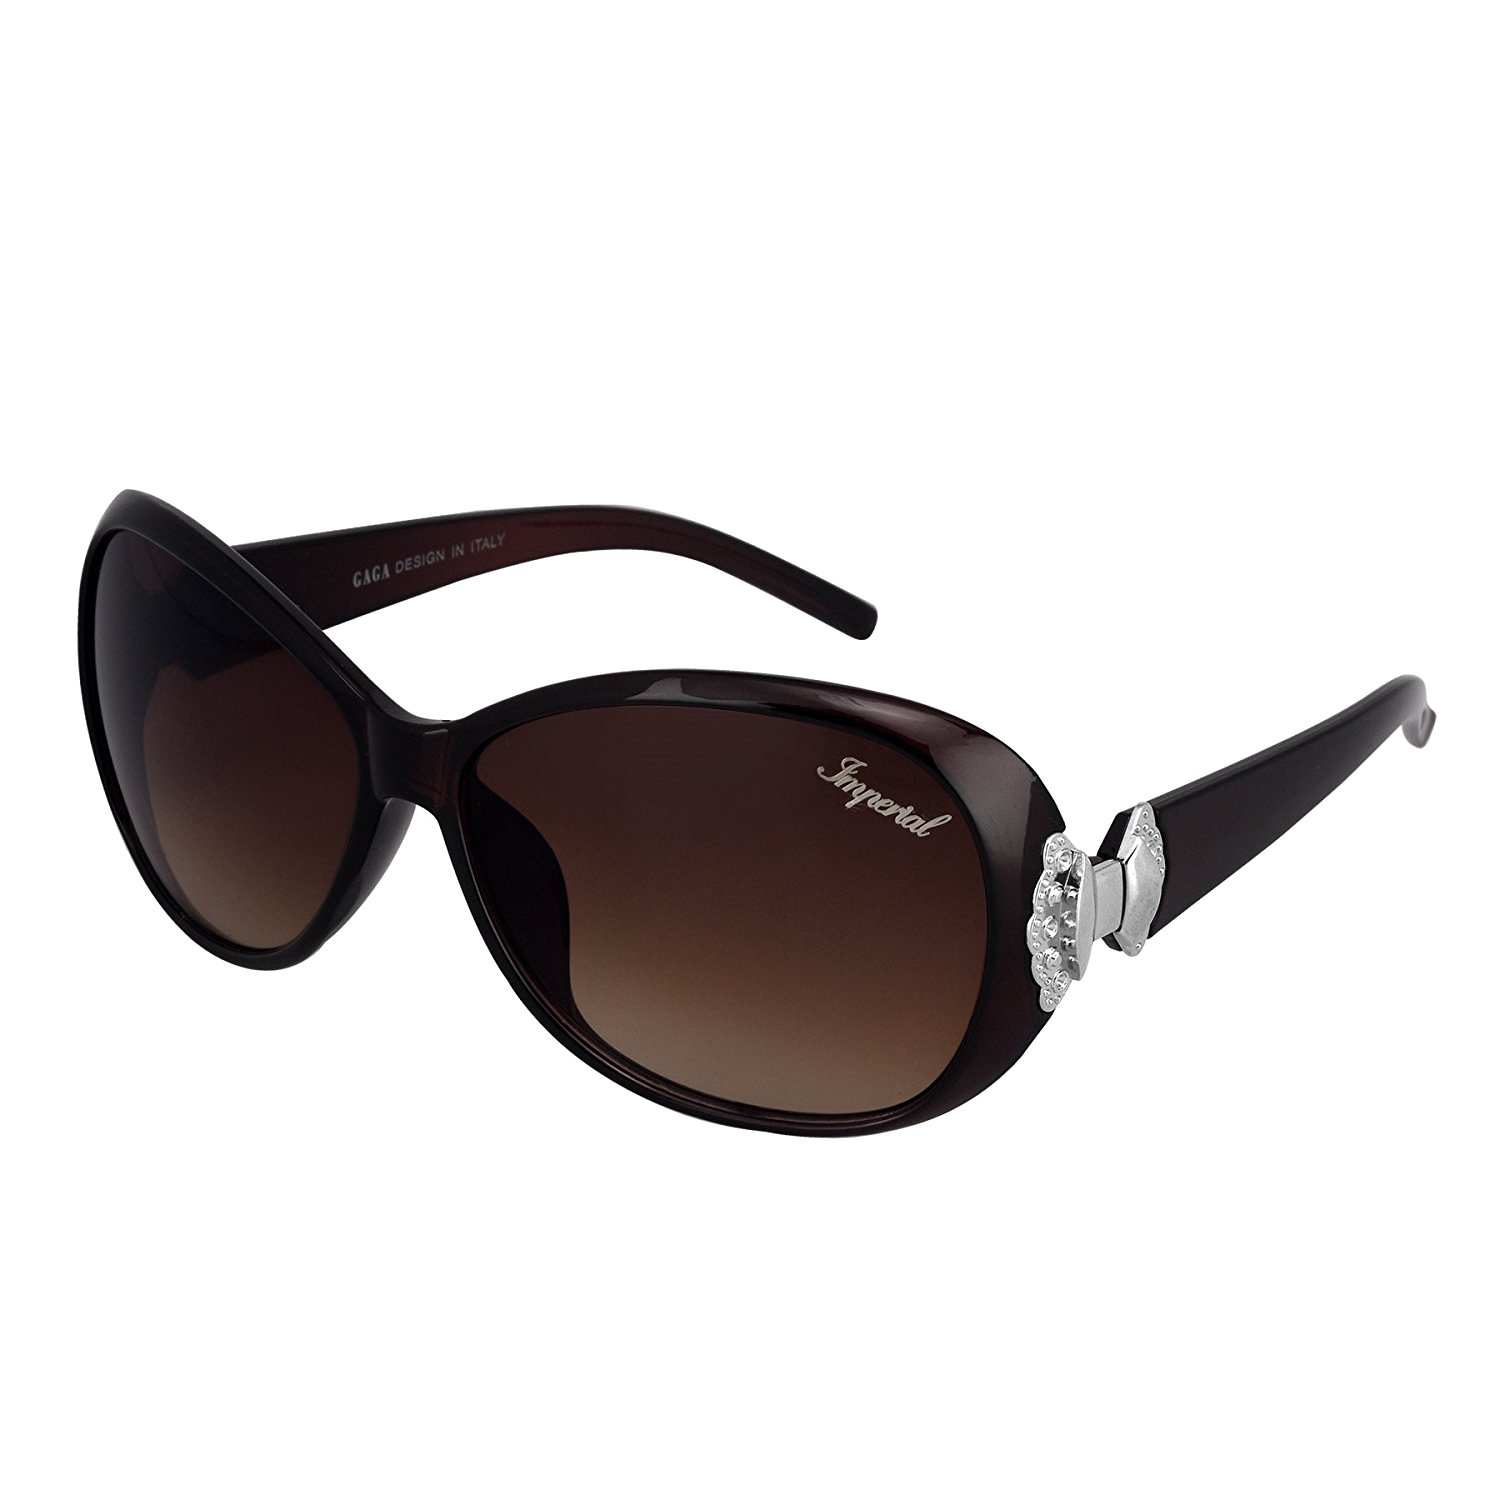 Sunglasses For Women PNG High-Quality Image